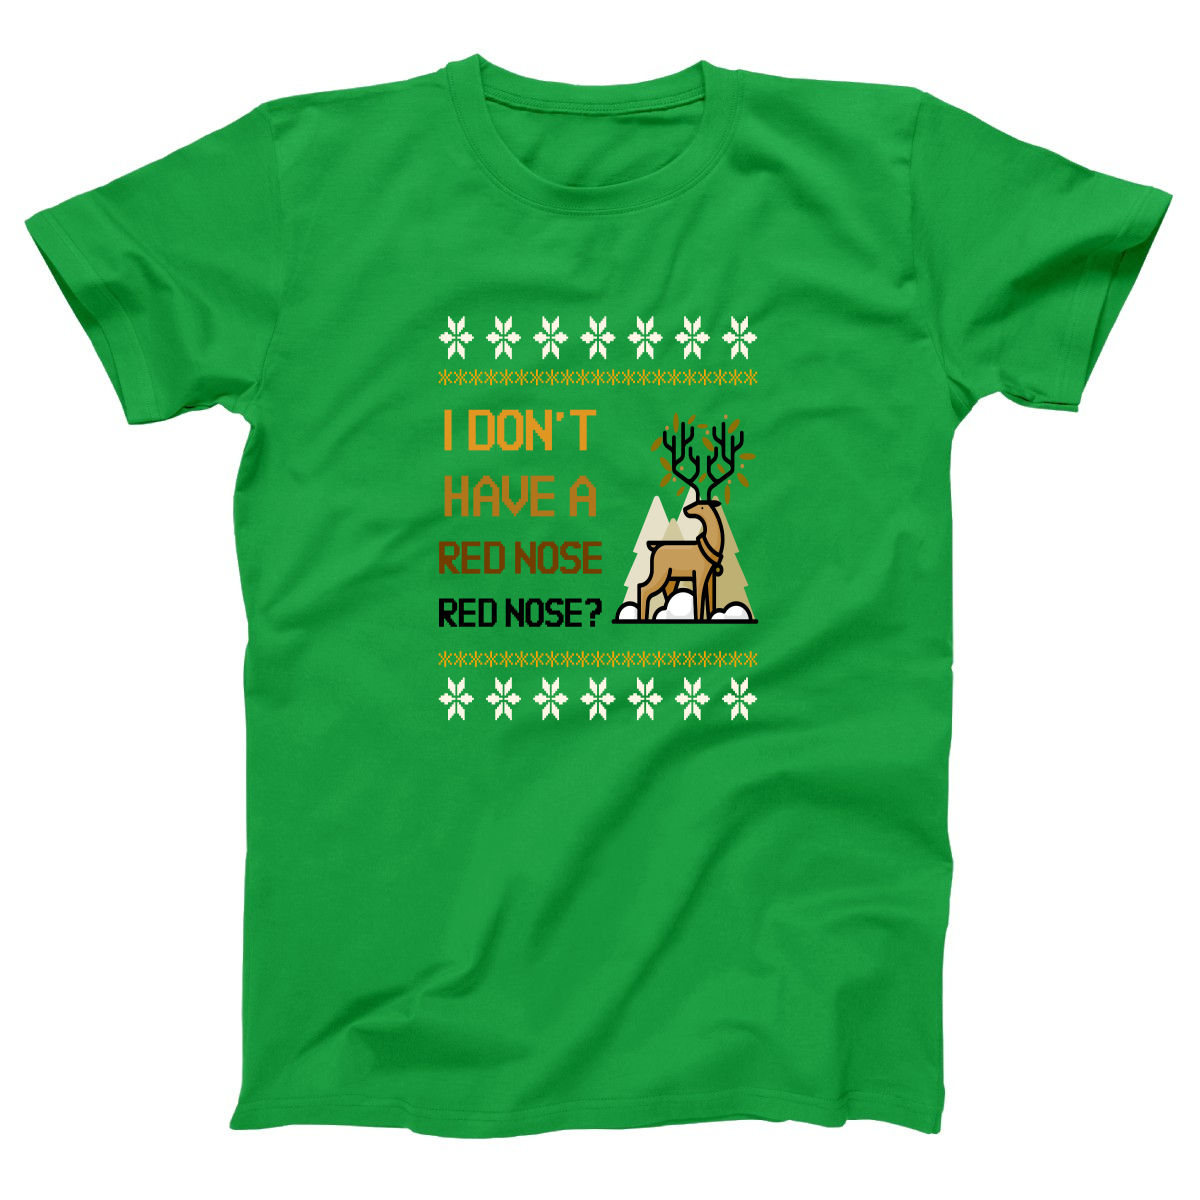 2021 Ugly Sweater Christmas Party Women's T-shirt | Green